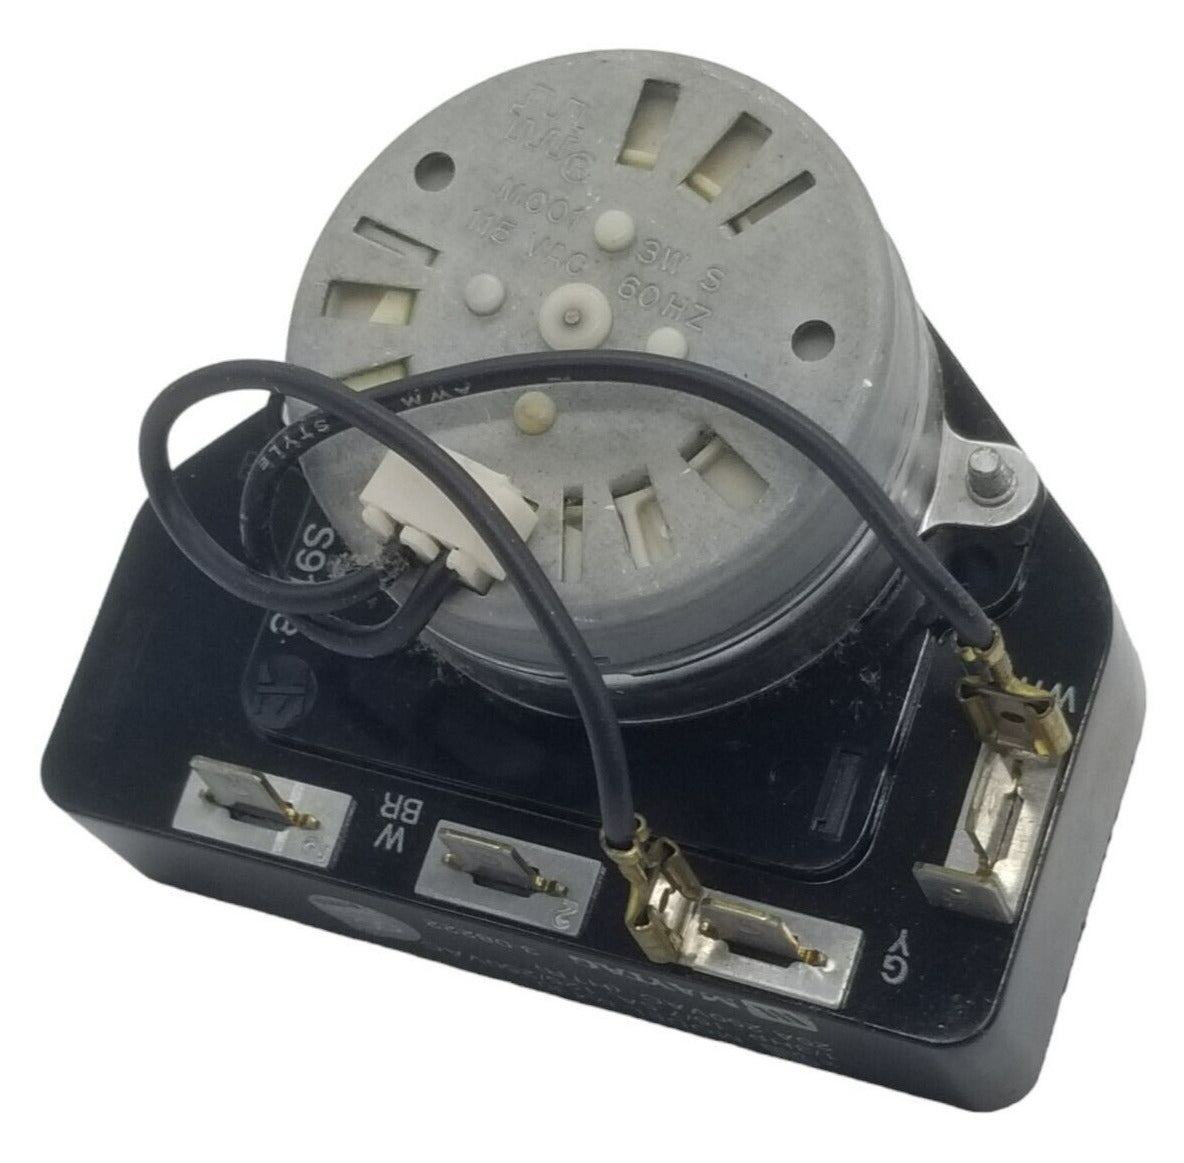 Genuine OEM Replacement for Maytag Dryer Timer 3-08222